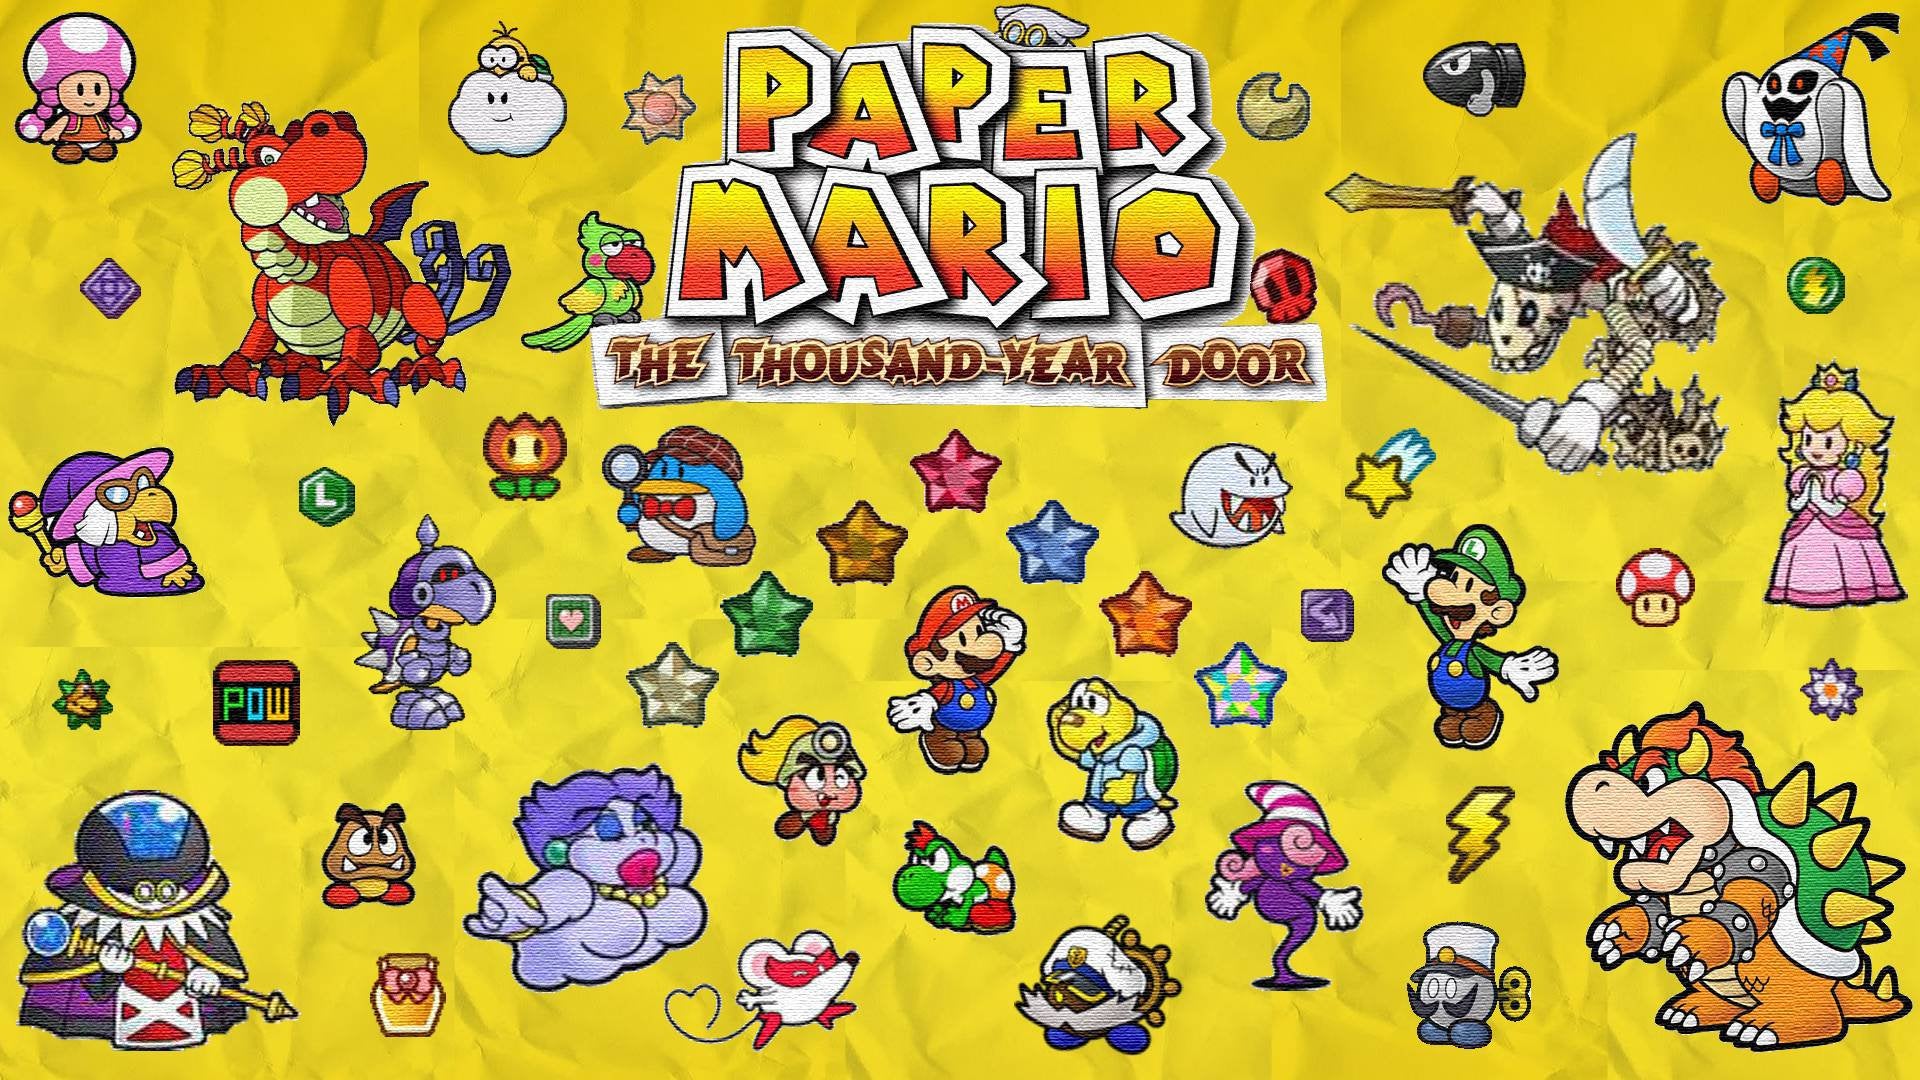 Hey R Gaming, Check Out This Paper Mario Wallpaper I Made! [1920x1080]